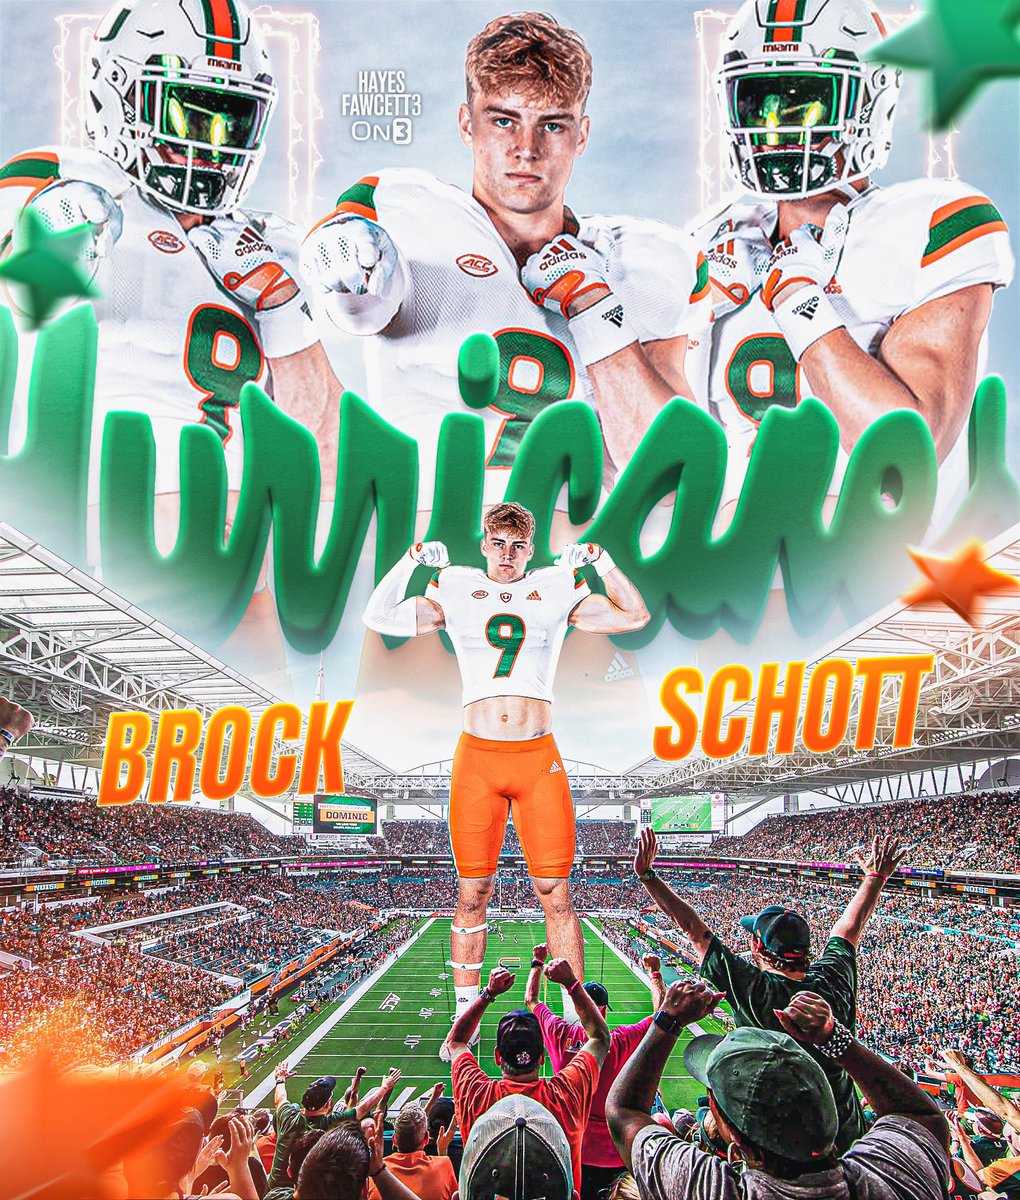 BREAKING: Four-Star TE Brock Schott has Committed to Miami, he tells me for @on3recruits The 6’4 220 TE from Leo, IN chose the Hurricanes over Ohio State, Florida State, & Louisville “TEU let’s roll #GoCanes” on3.com/db/brock-schot…